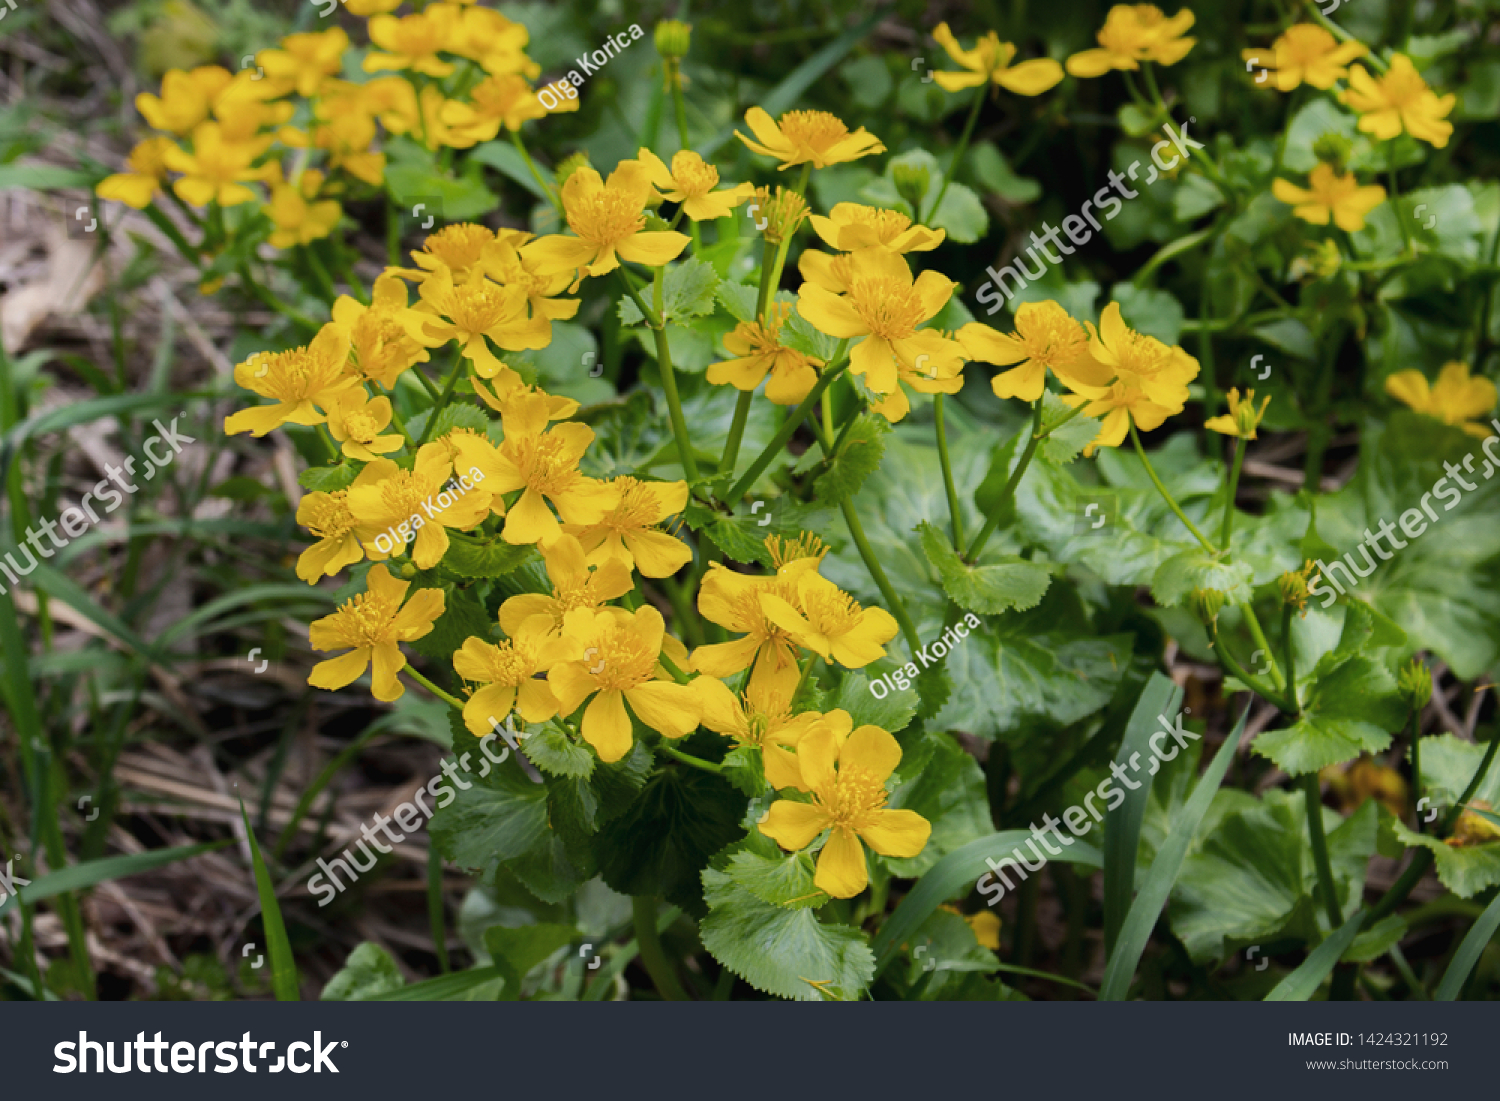 Wild-growing flowering plant caltha palustris yellow flowers with petals and stamens green leaves. Marigold grows in the swamp Lots of yellow flowers, wildlife, low key #1424321192